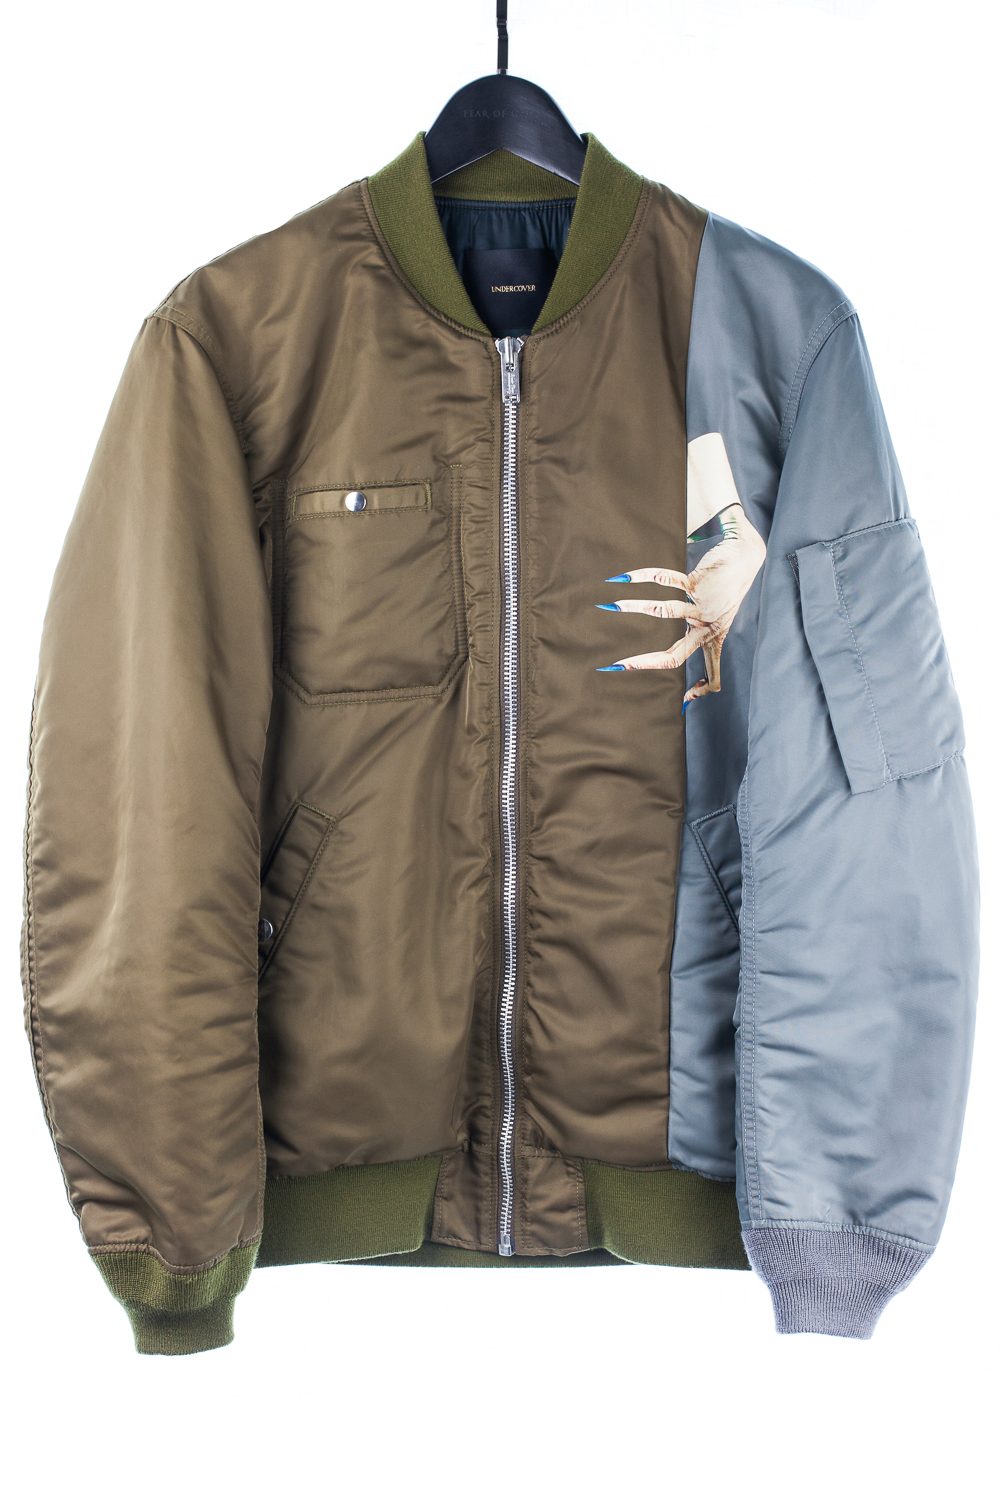 FW15 “No (B)orders” D-Hand Ma-1 Bomber